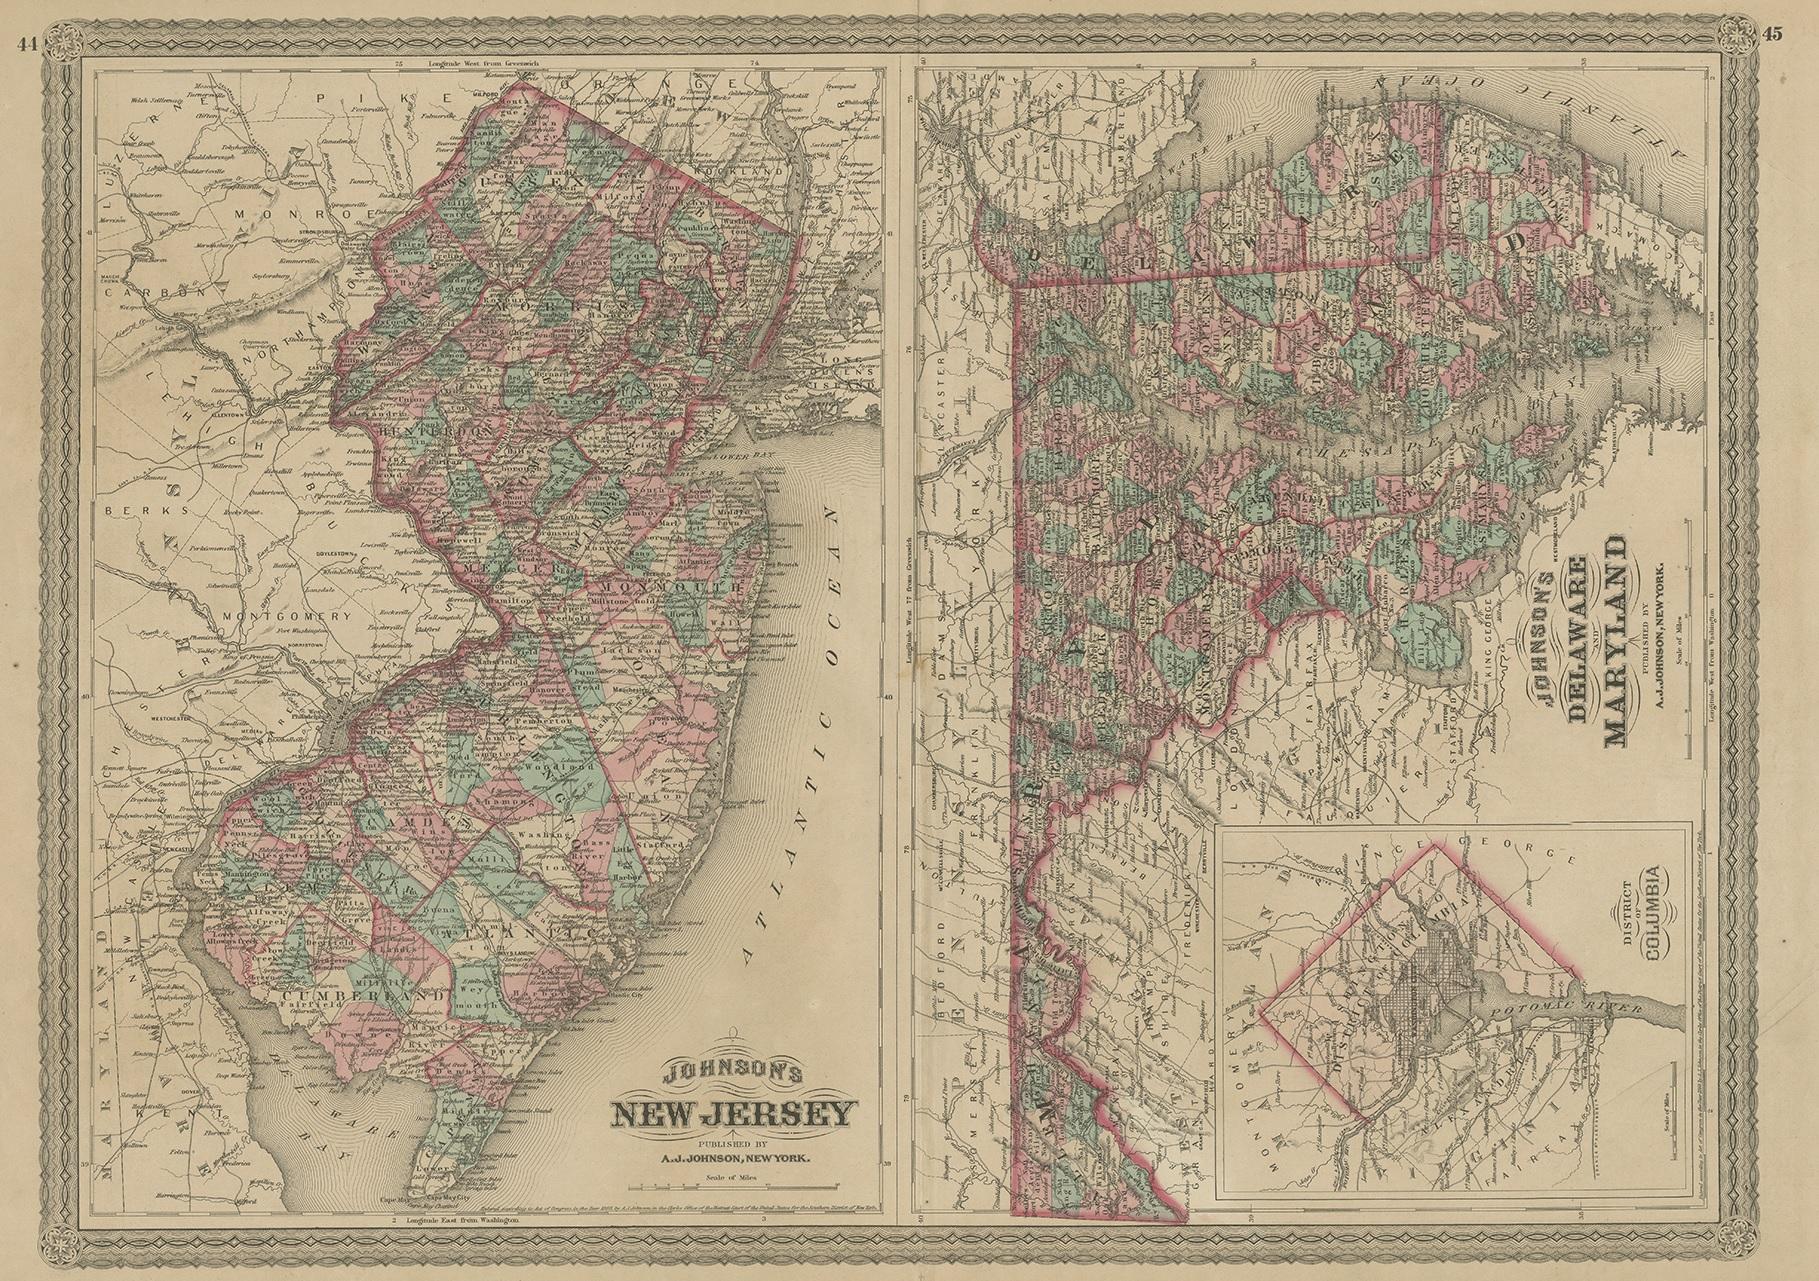 Antique map titled 'Johnson's New Jersey (..). Two maps on one sheet showing New Jersey, Delaware and Maryland. With inset map of the district of Columbia. This map originates from 'Johnson's New Illustrated Family Atlas of the World' by A.J.